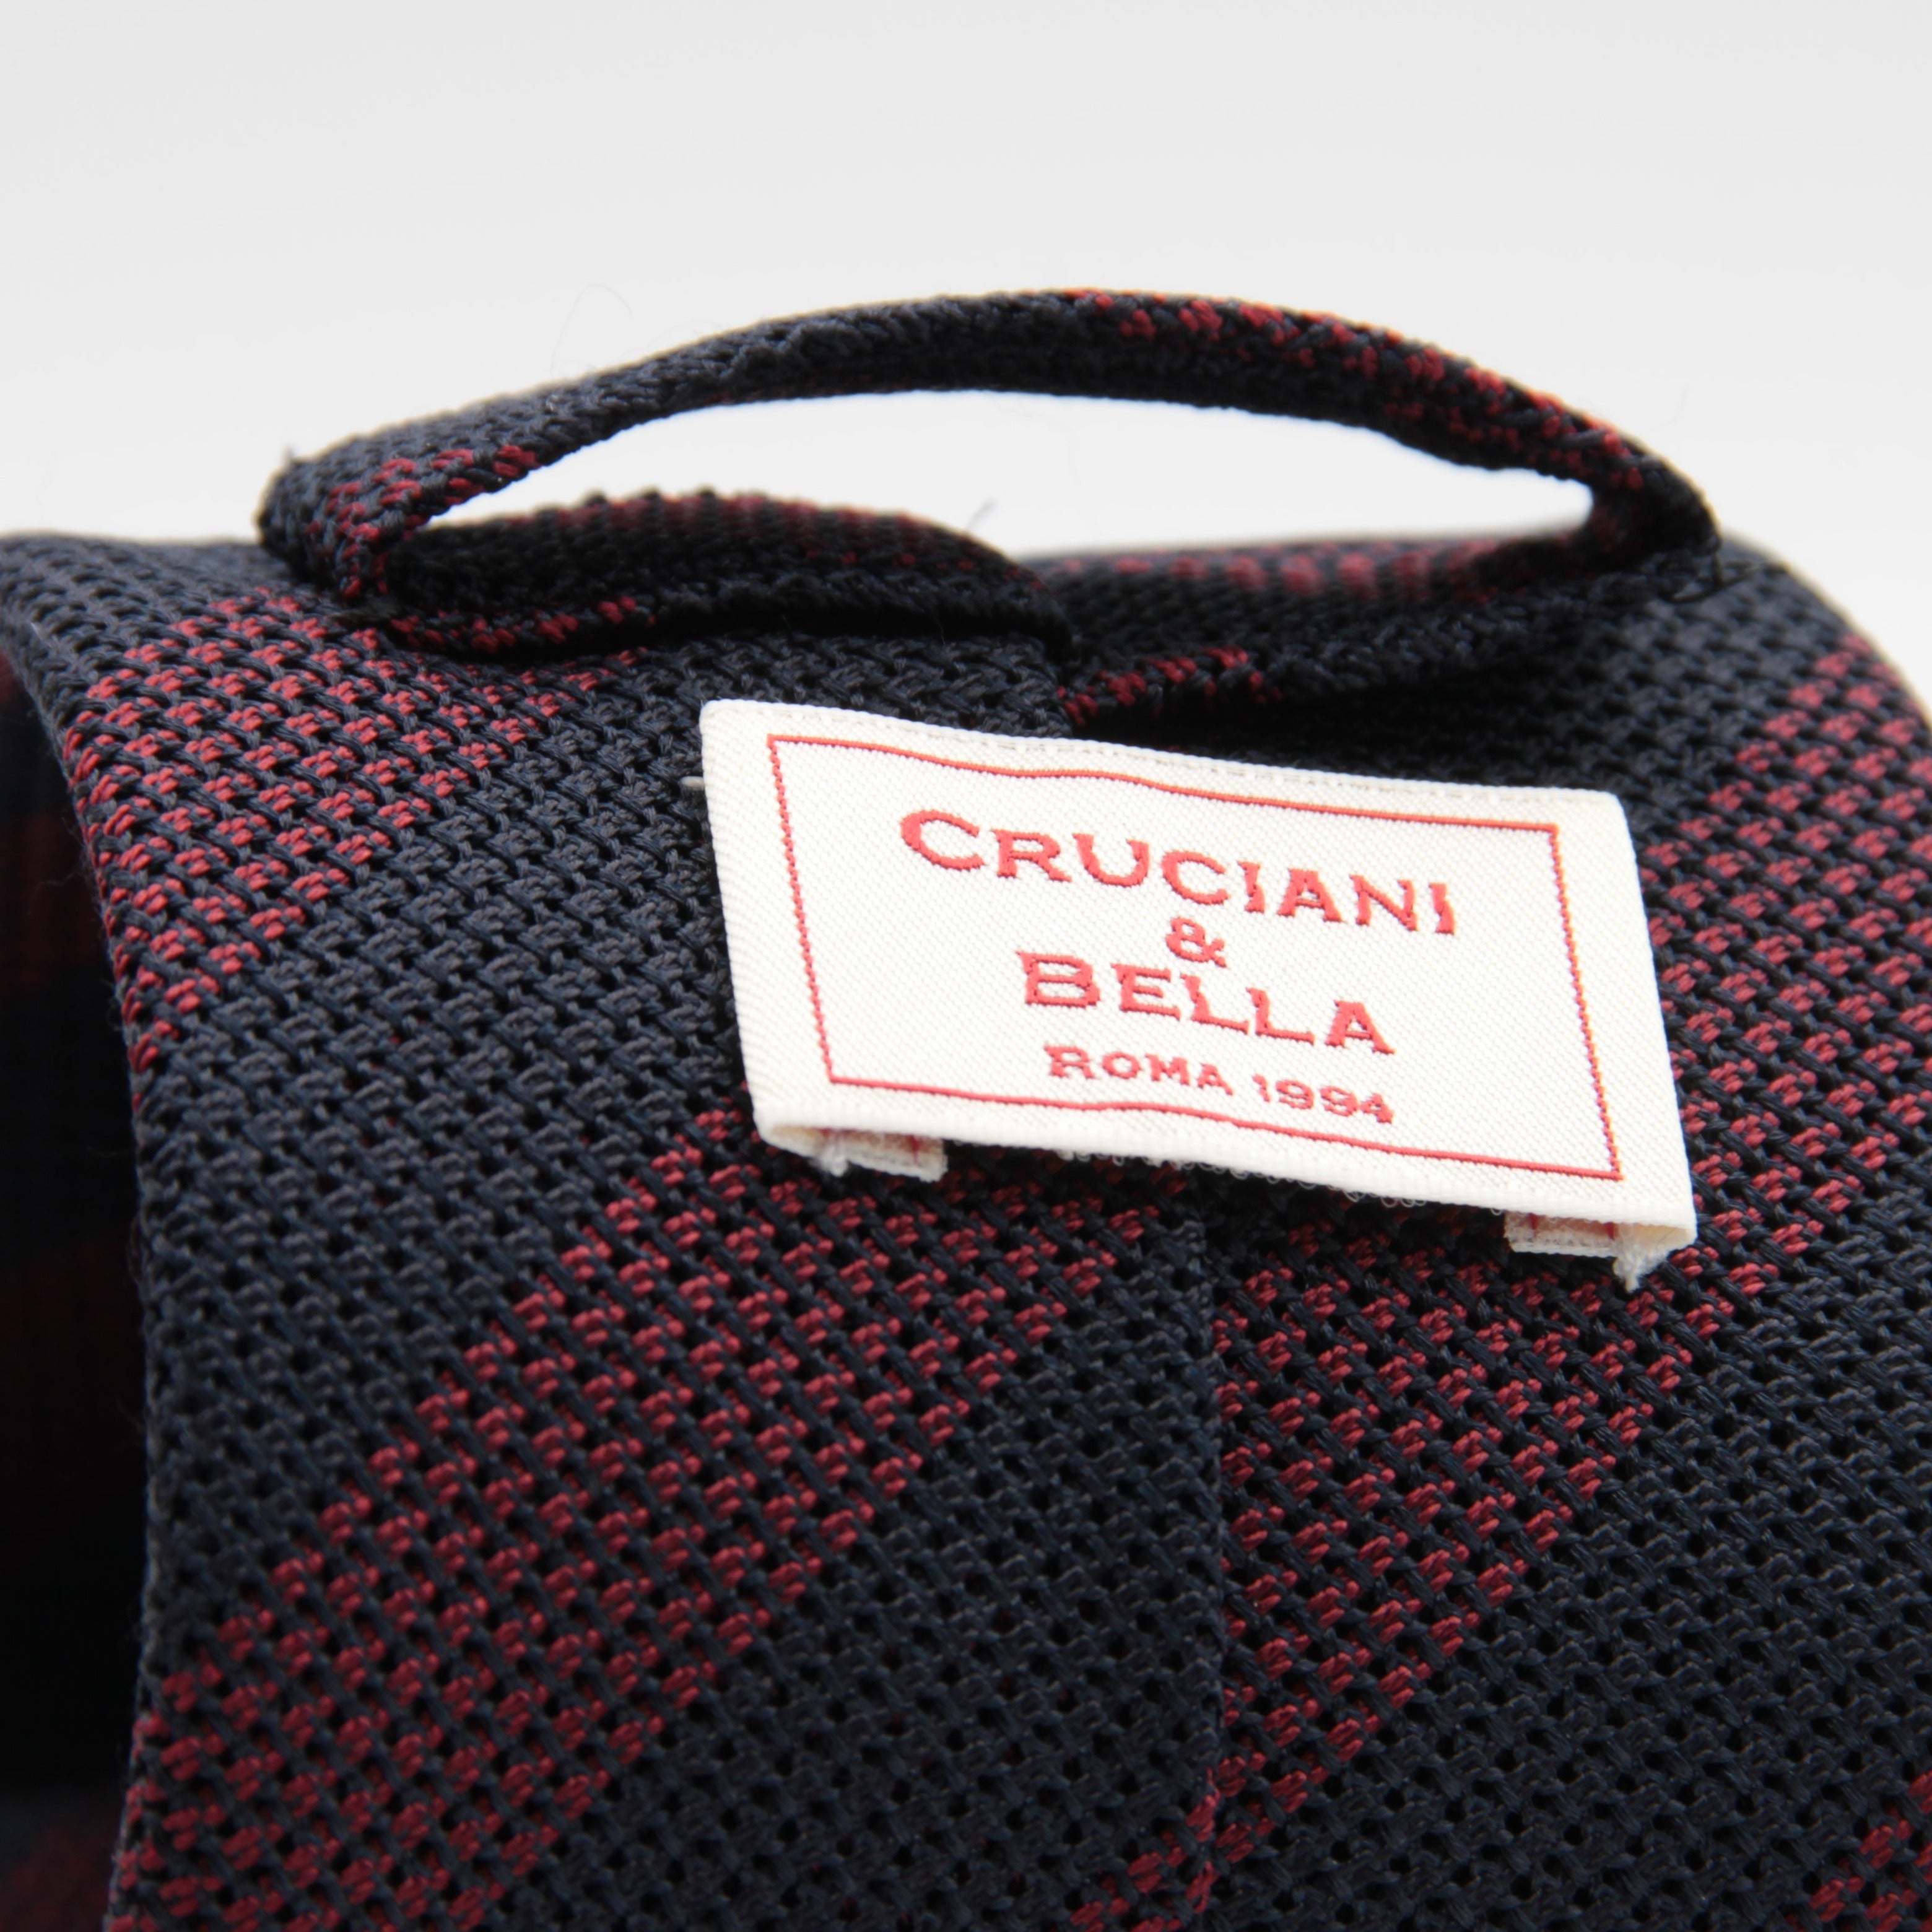 Cruciani & Bella 100% Silk Garza Fine Woven in Italy Unlined Hand rolled blades Blue and Wine Striped Handmade in Italy 8 cm x 150 cm #6196